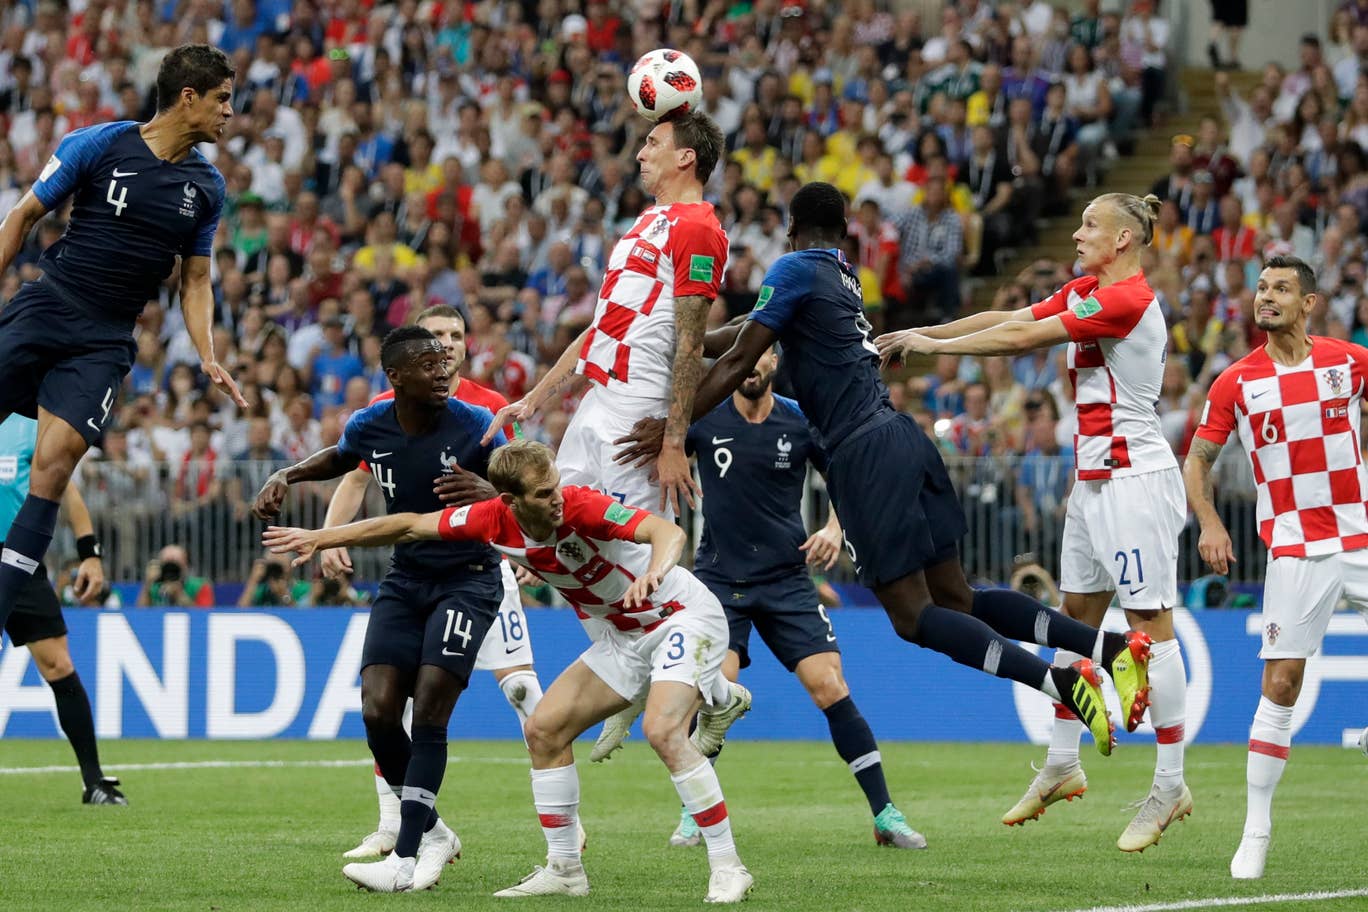 https://static.independent.co.uk/s3fs-public/thumbnails/image/2018/07/15/17/world-cup-final-17.jpg?width=1368&height=912&fit=bounds&format=pjpg&auto=webp&quality=70